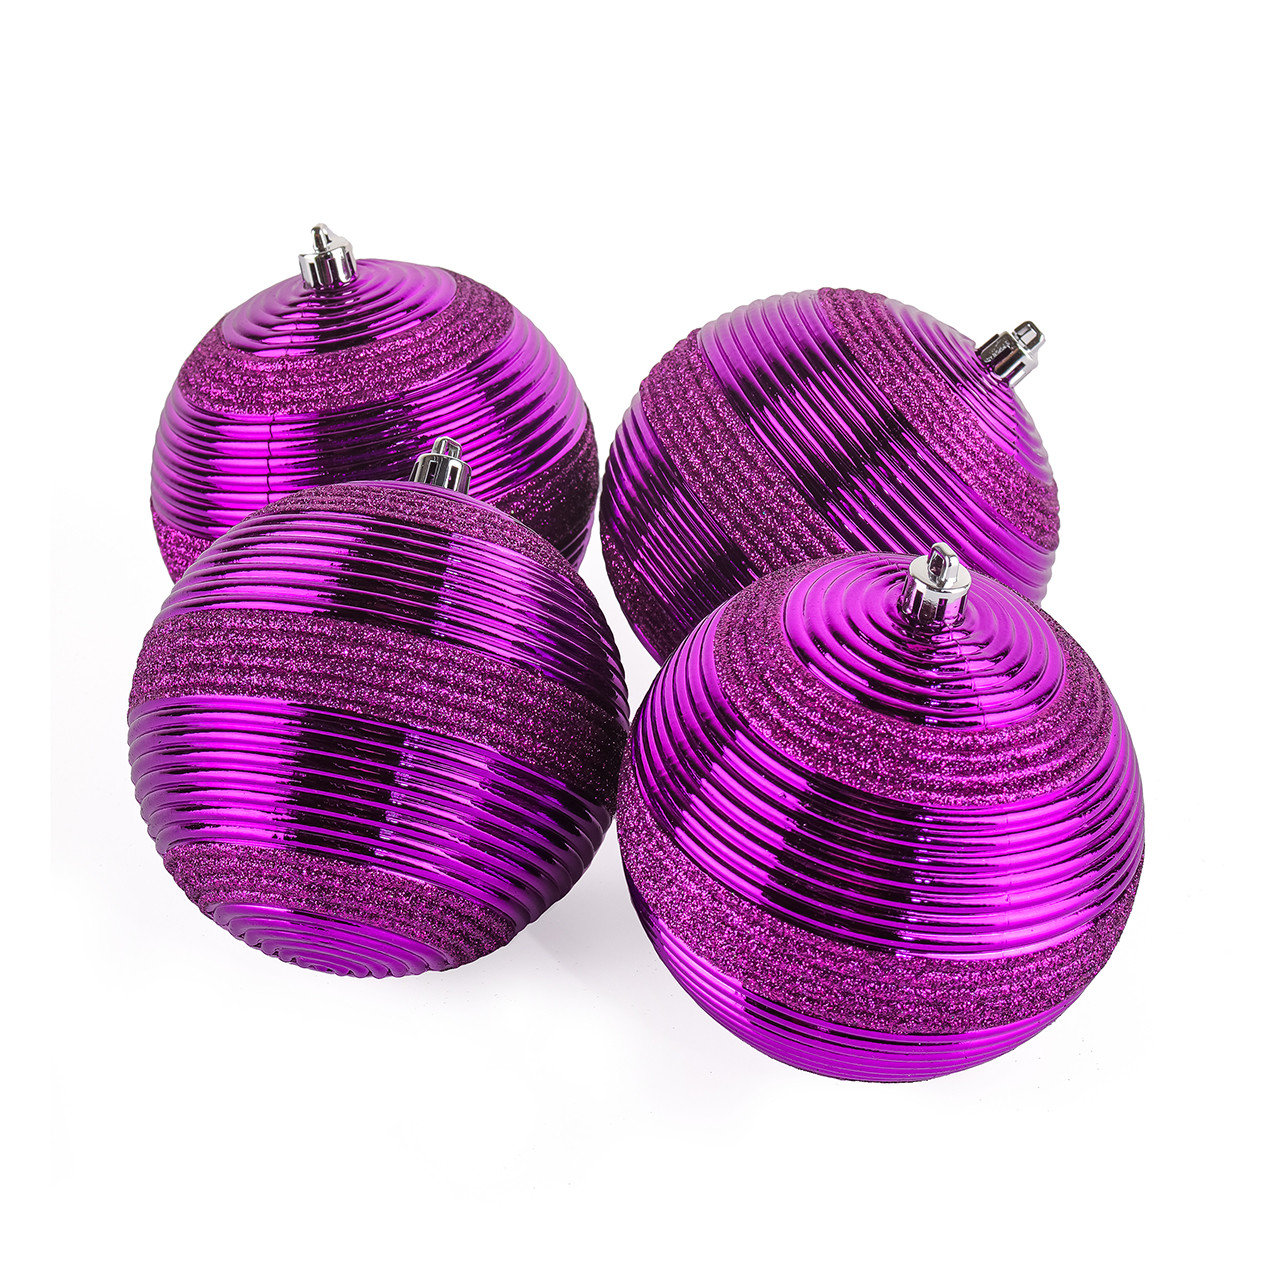 4.5 in. Purple Christmas Ball Ornaments, Set of 6